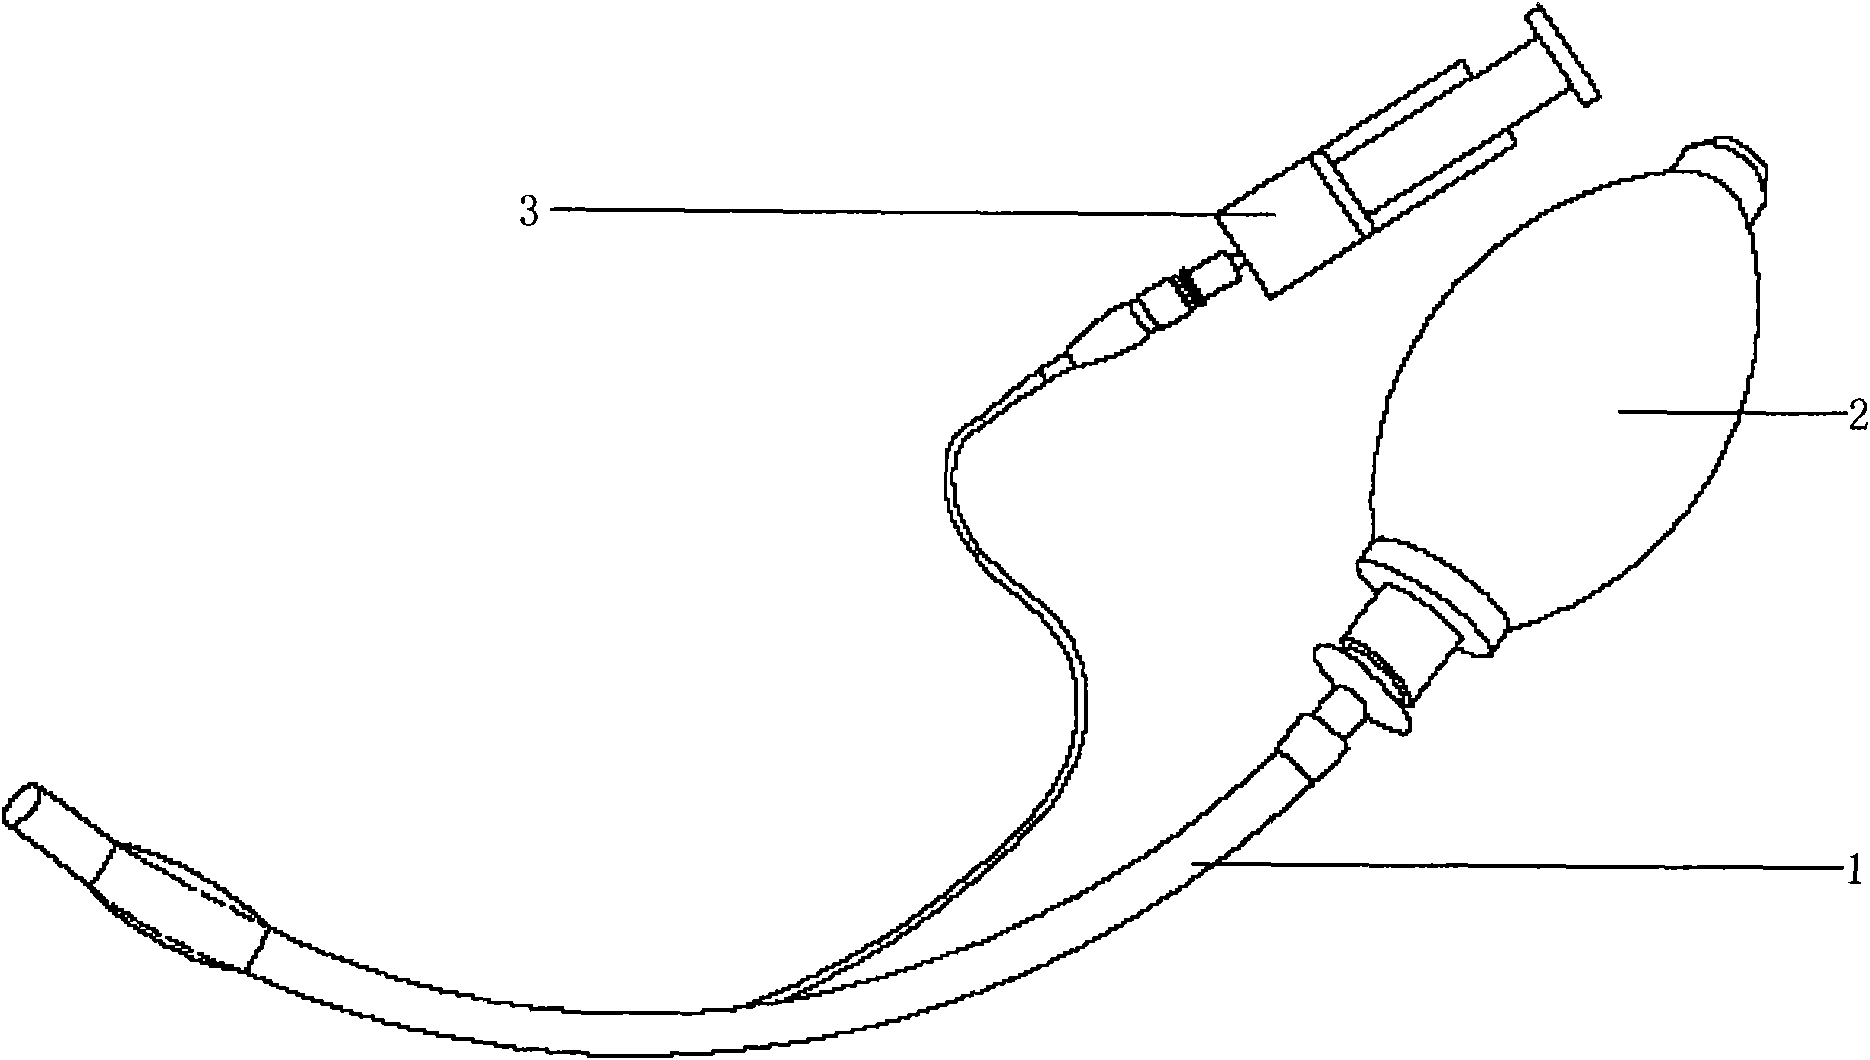 Device for removing residues on balloon of tracheal cannula of patient